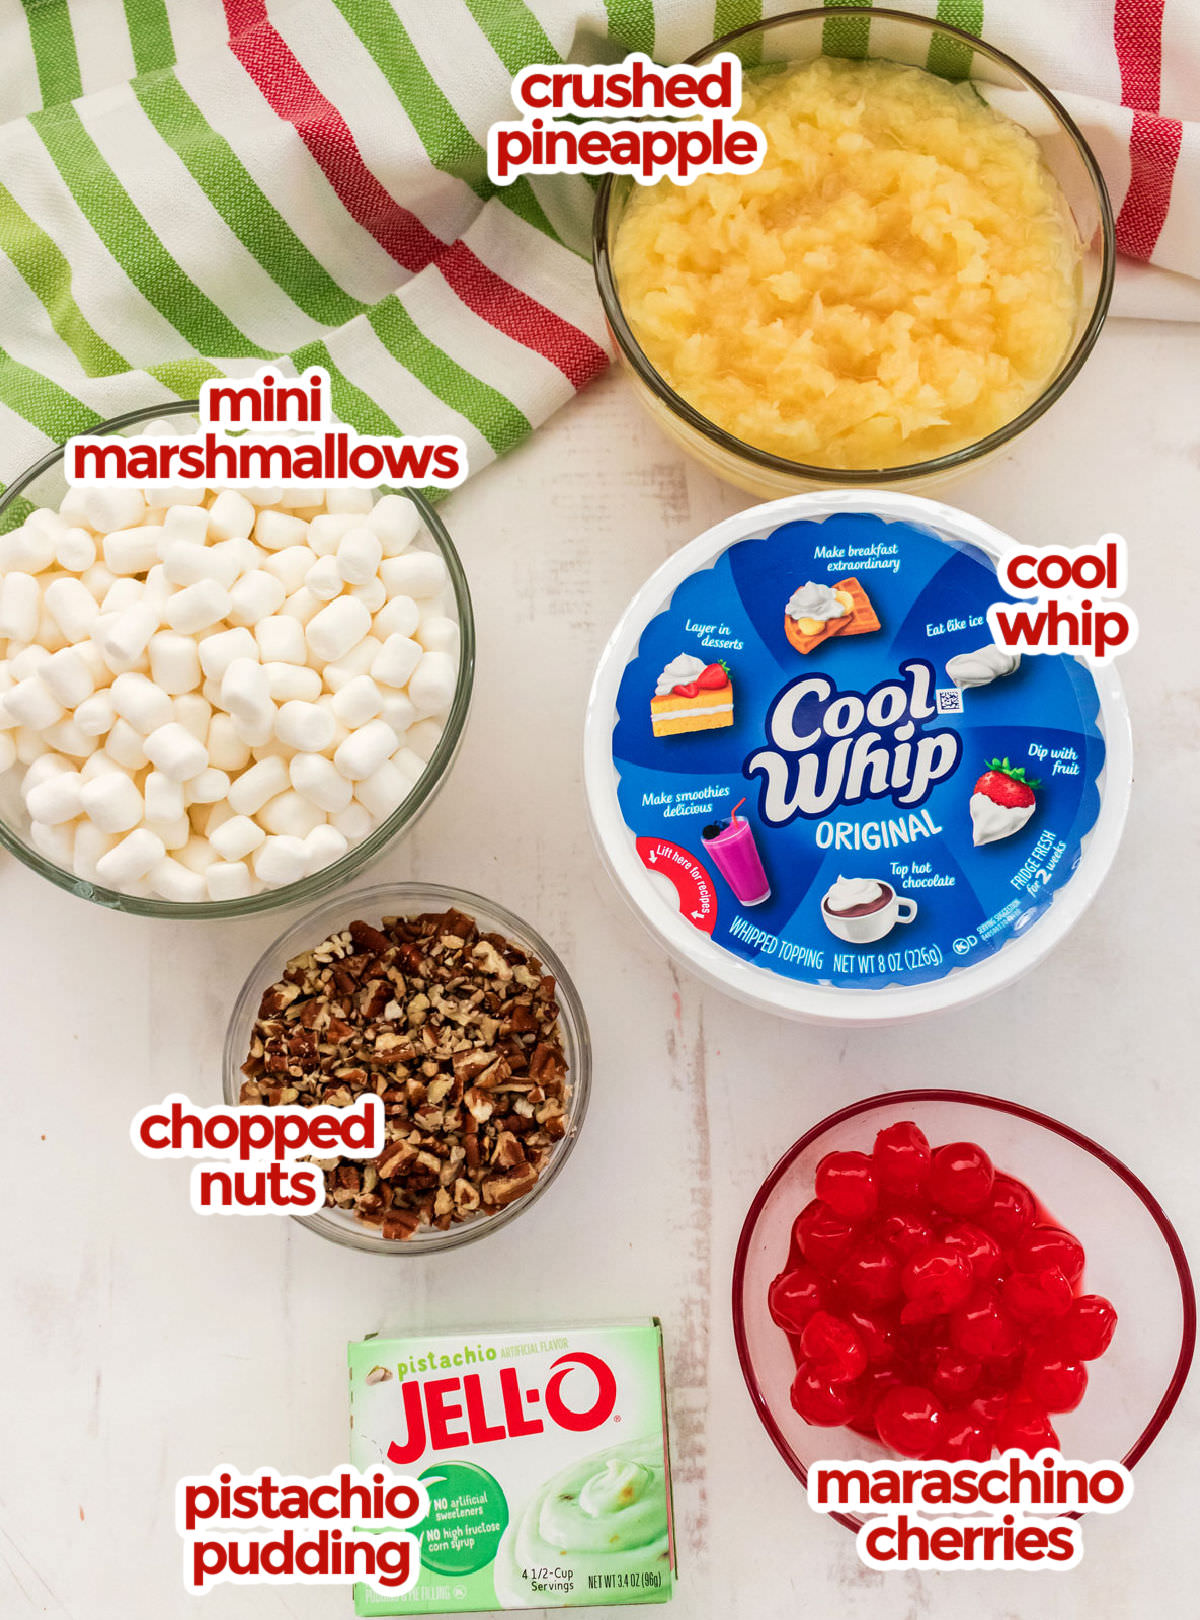 All the ingredients you will need to make Watergate Salad including Crushed Pineapple, Mini Marshmallows, Cool Whip, Chopped Nuts, Pistachio Instant Pudding and Maraschino Cherries.